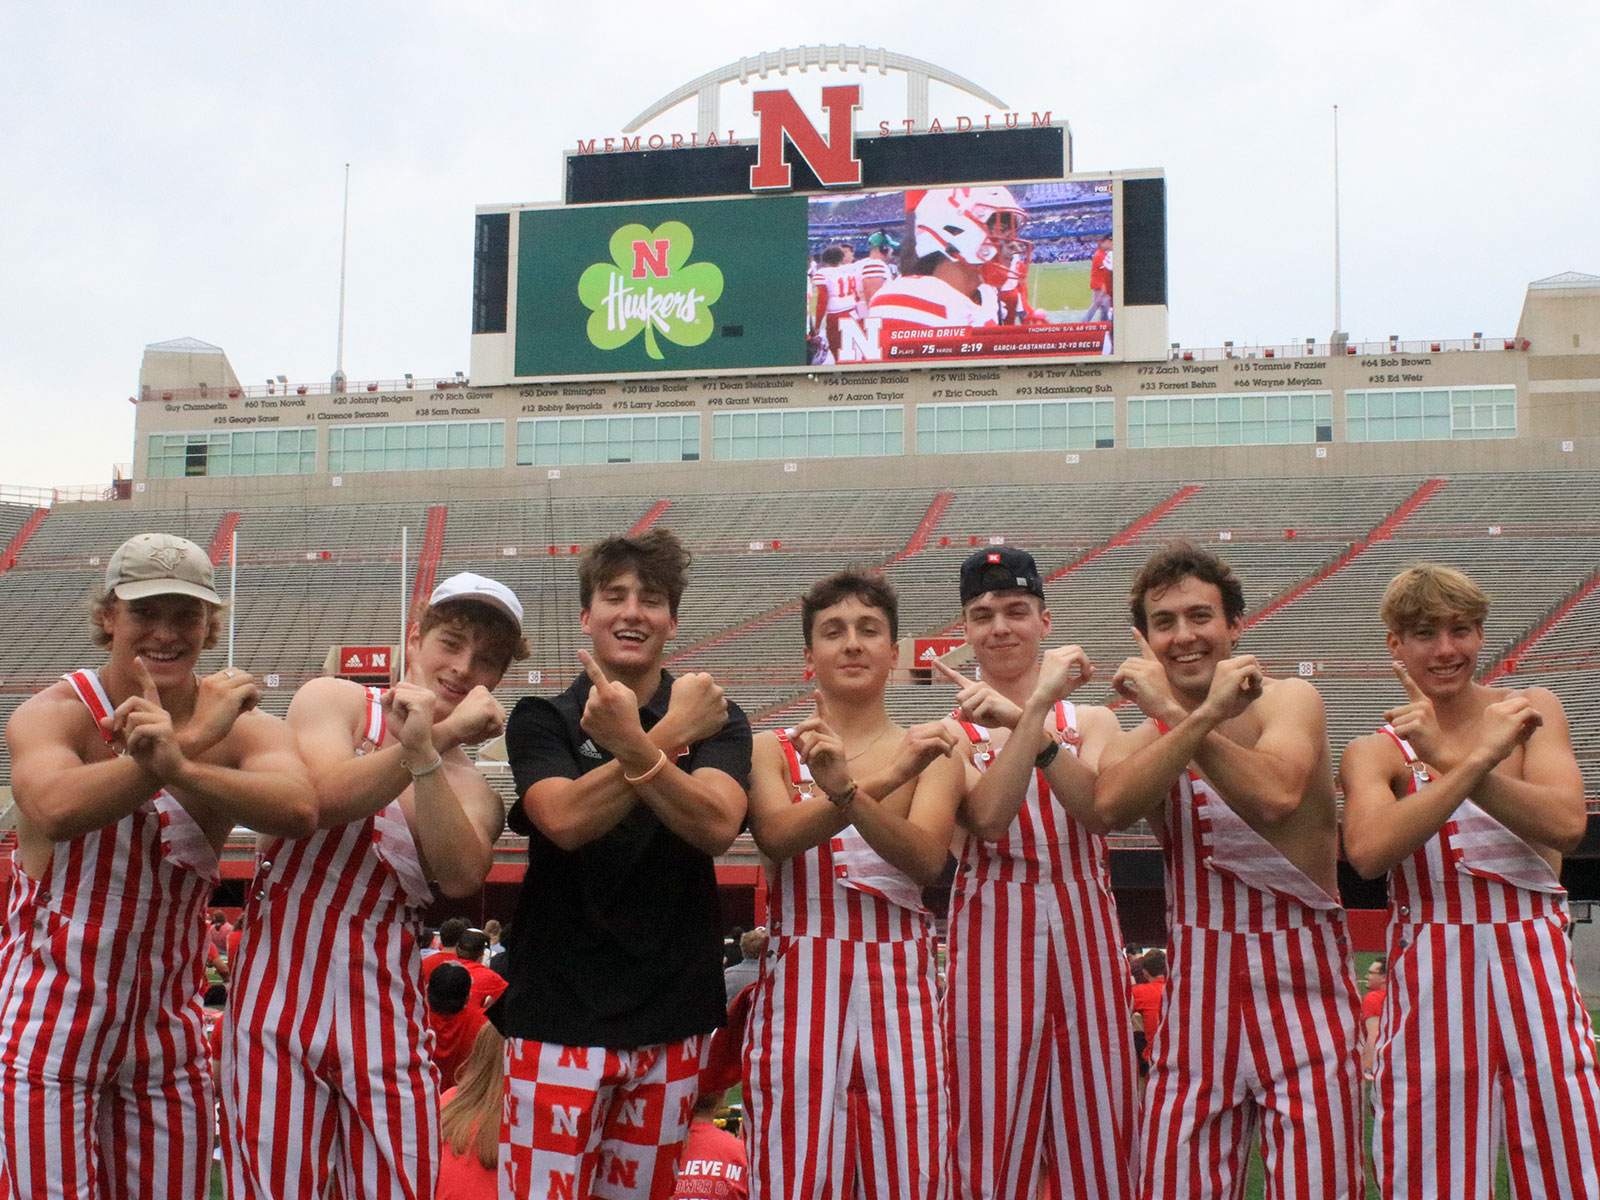 Students cheer on the Huskers at the watch party held on August 27, 2022.